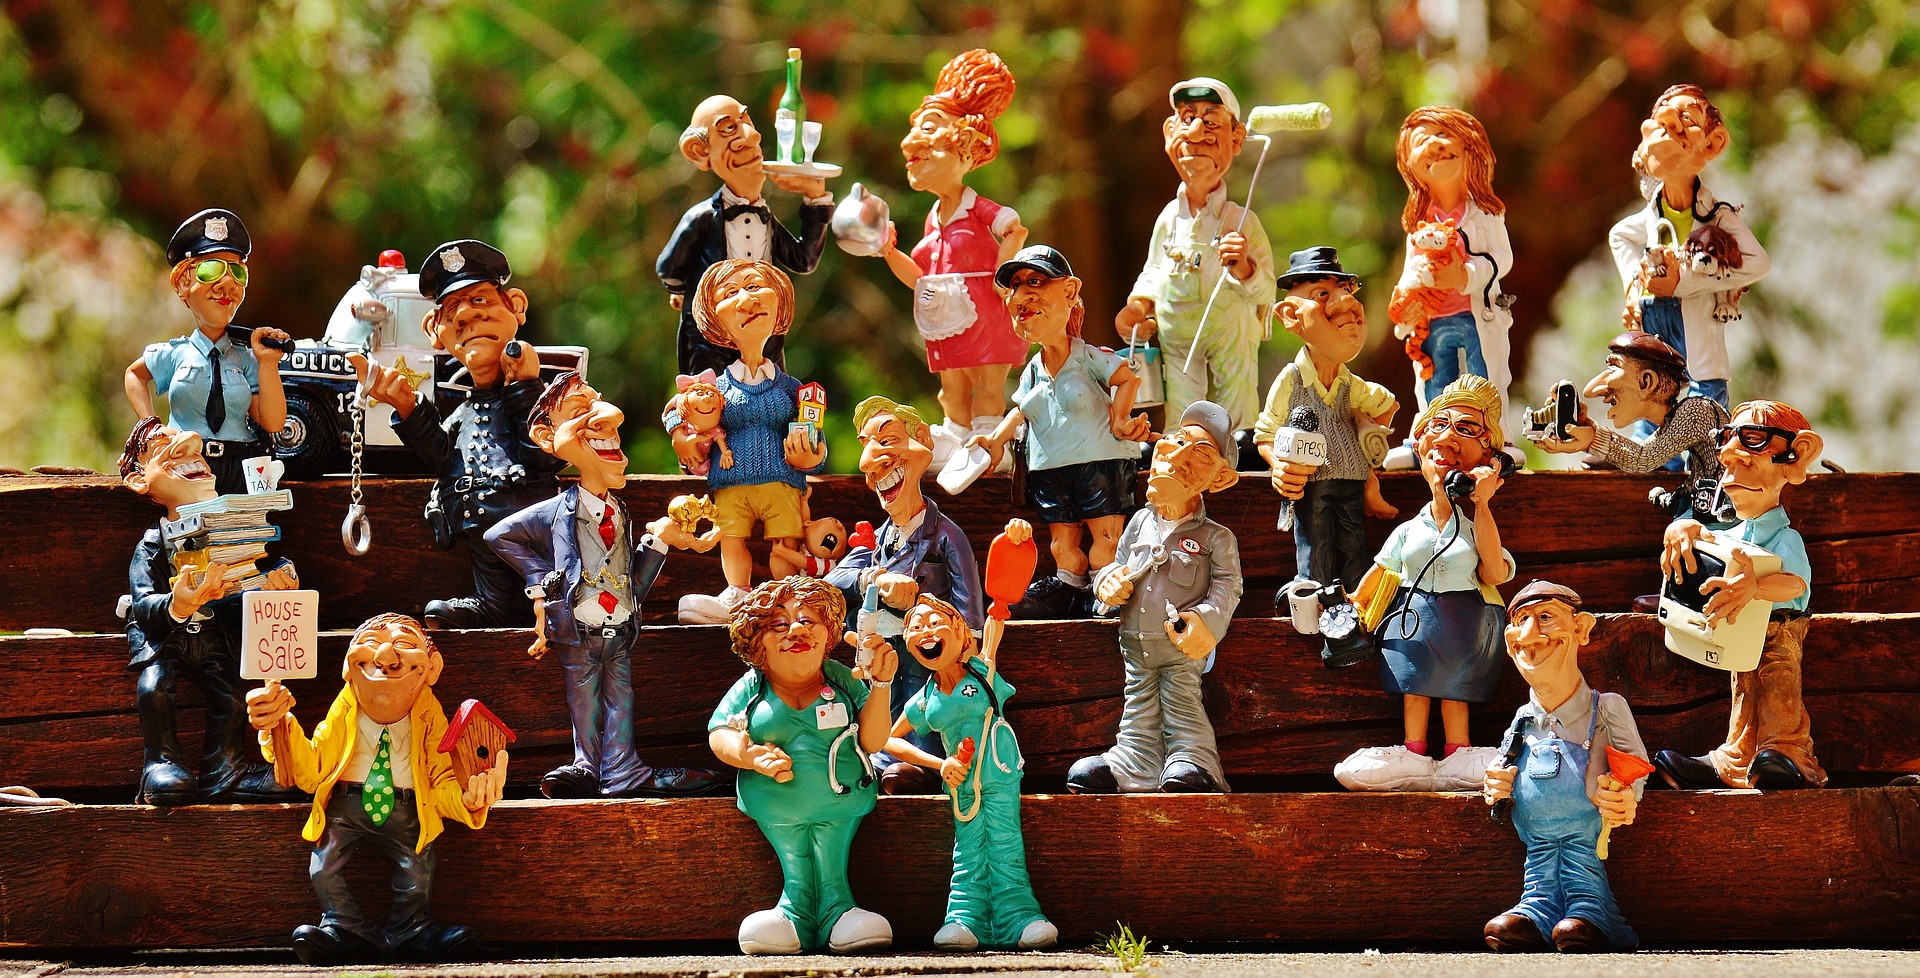 Little plastic figures depicting various jobs standing on some steps.